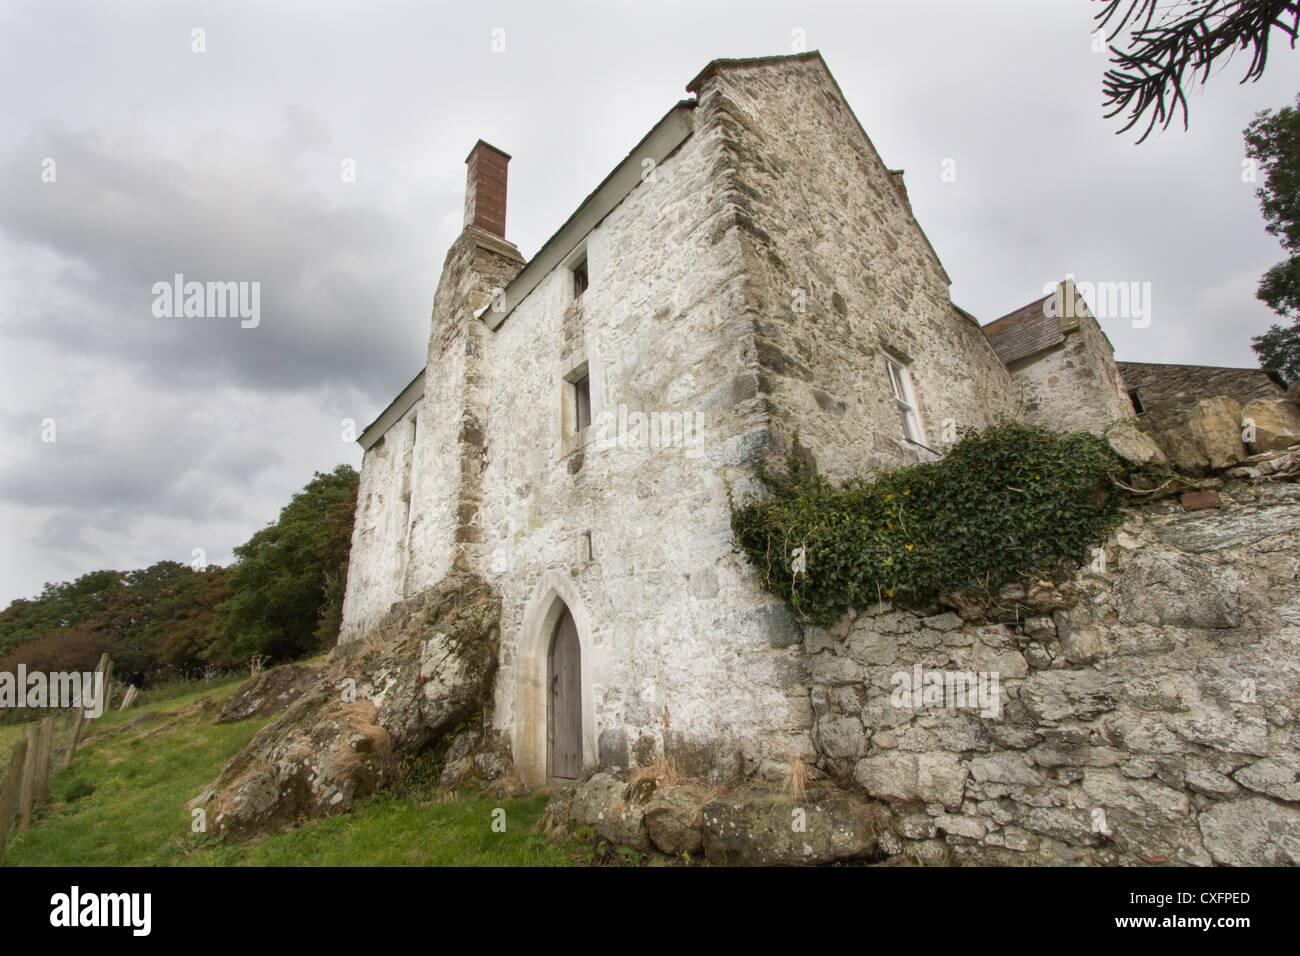 Medieval Welsh hall house, Neuadd Hafoty, Isle of Anglesey looked after by CADW, and open to the public on rare occasions. Stock Photo